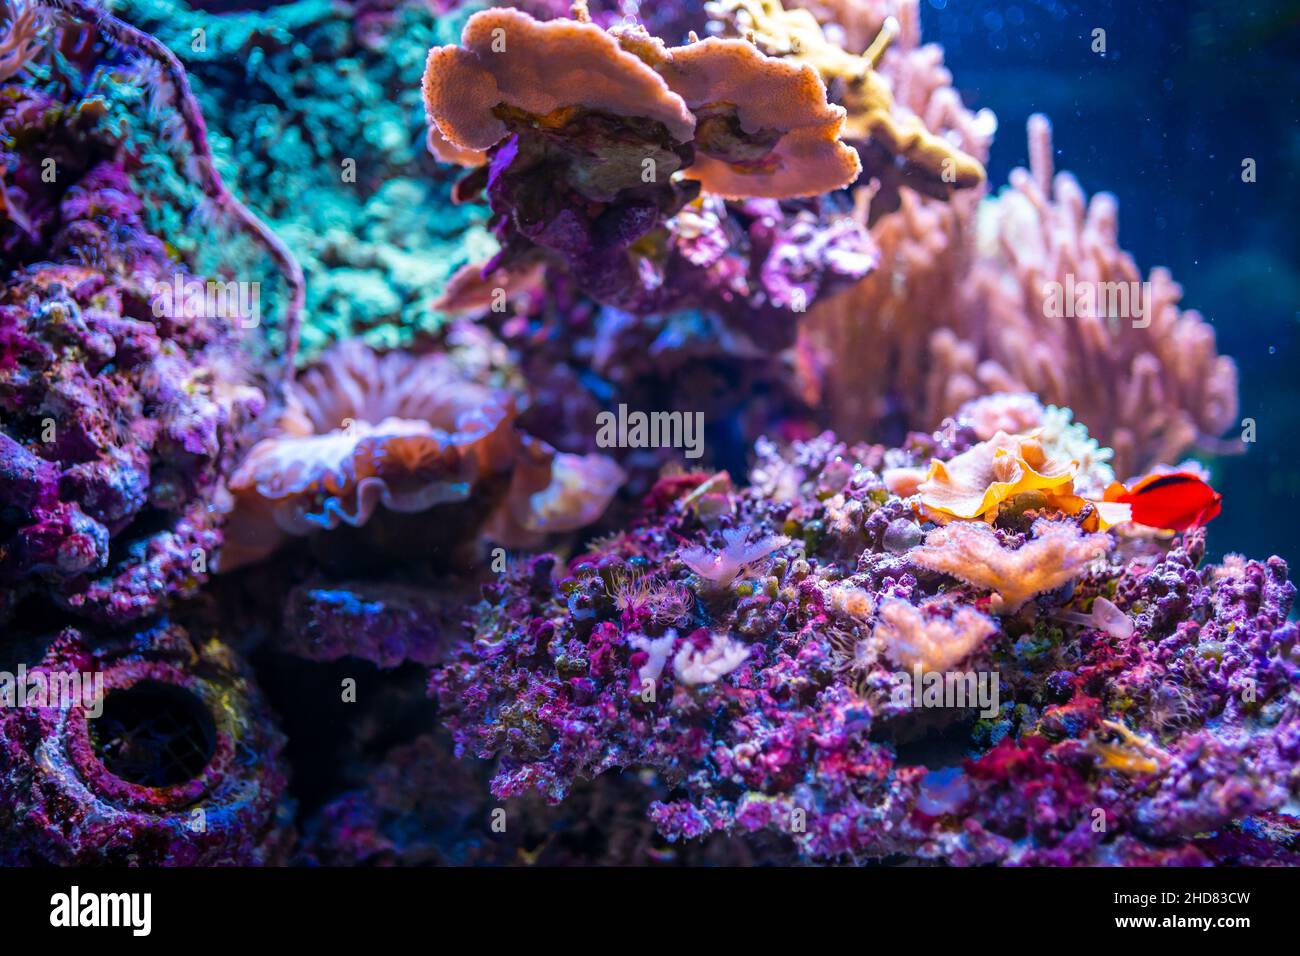 Beautiful aquarium with different types of fish and corals in the neon light in Prague, Czech republic Stock Photo